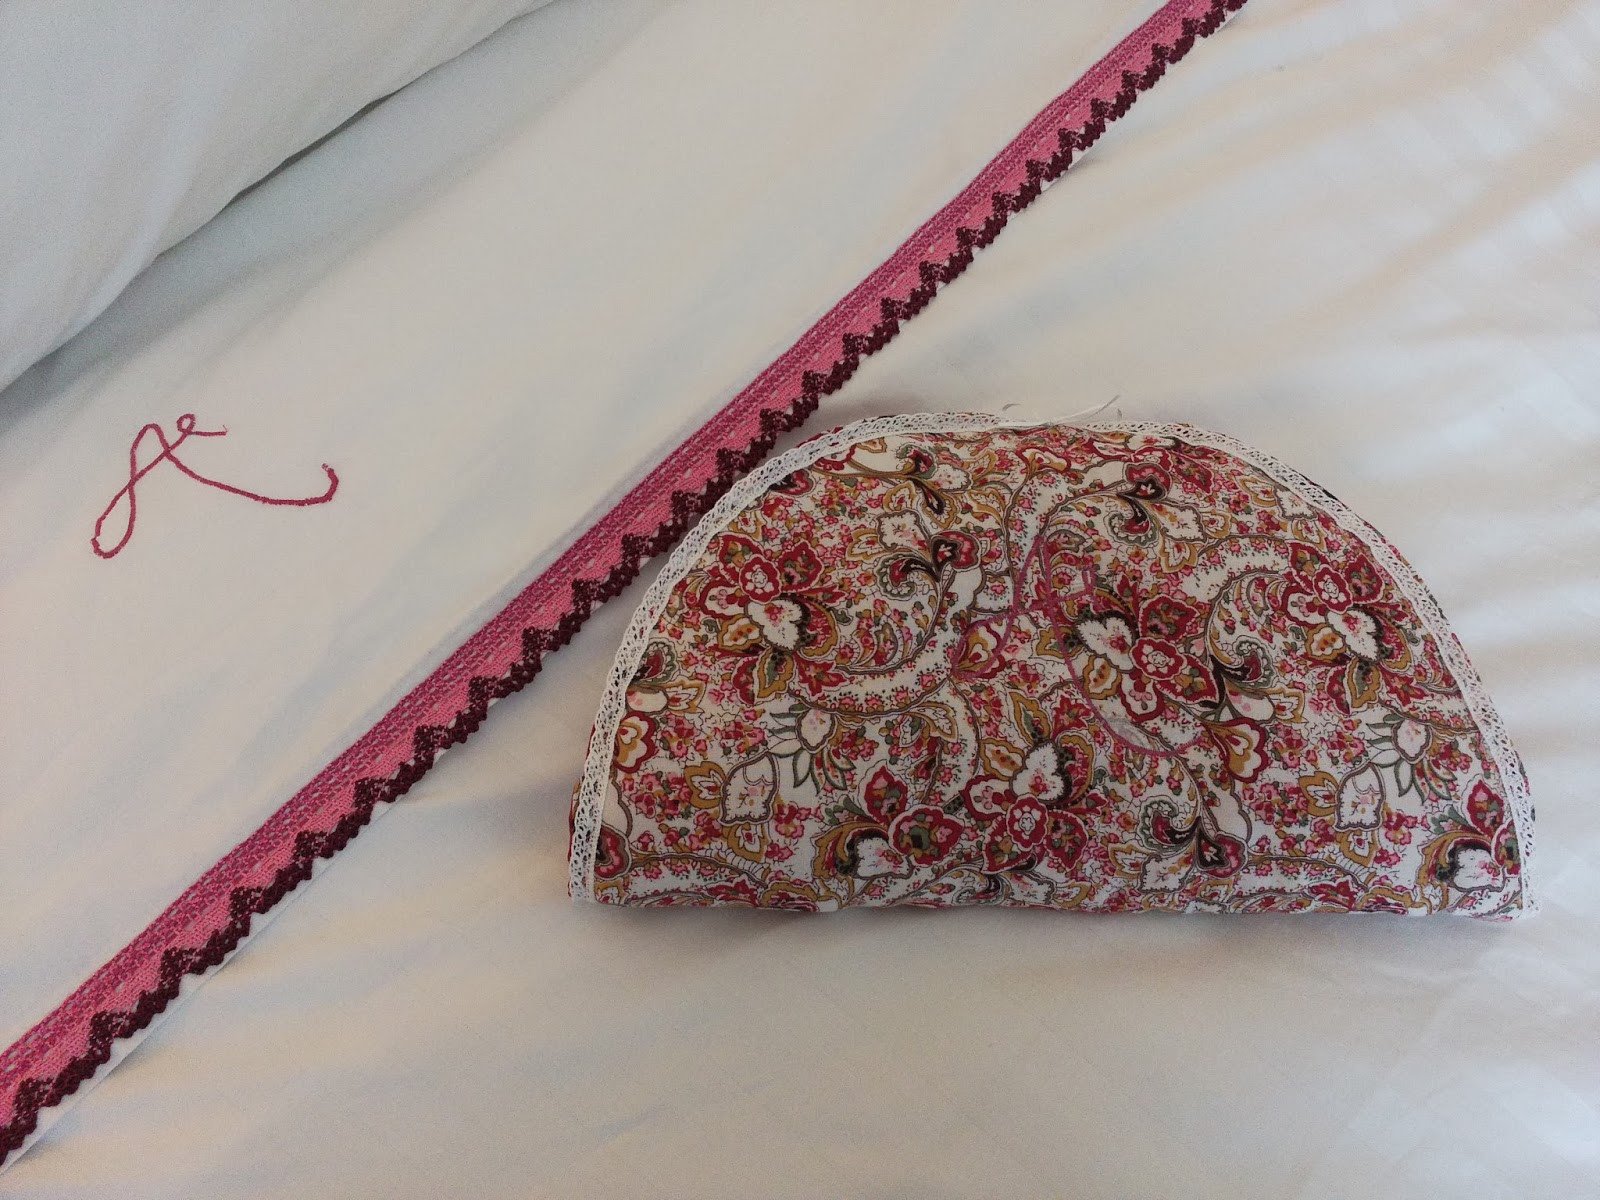 A pretty lingerie bag to give or keep